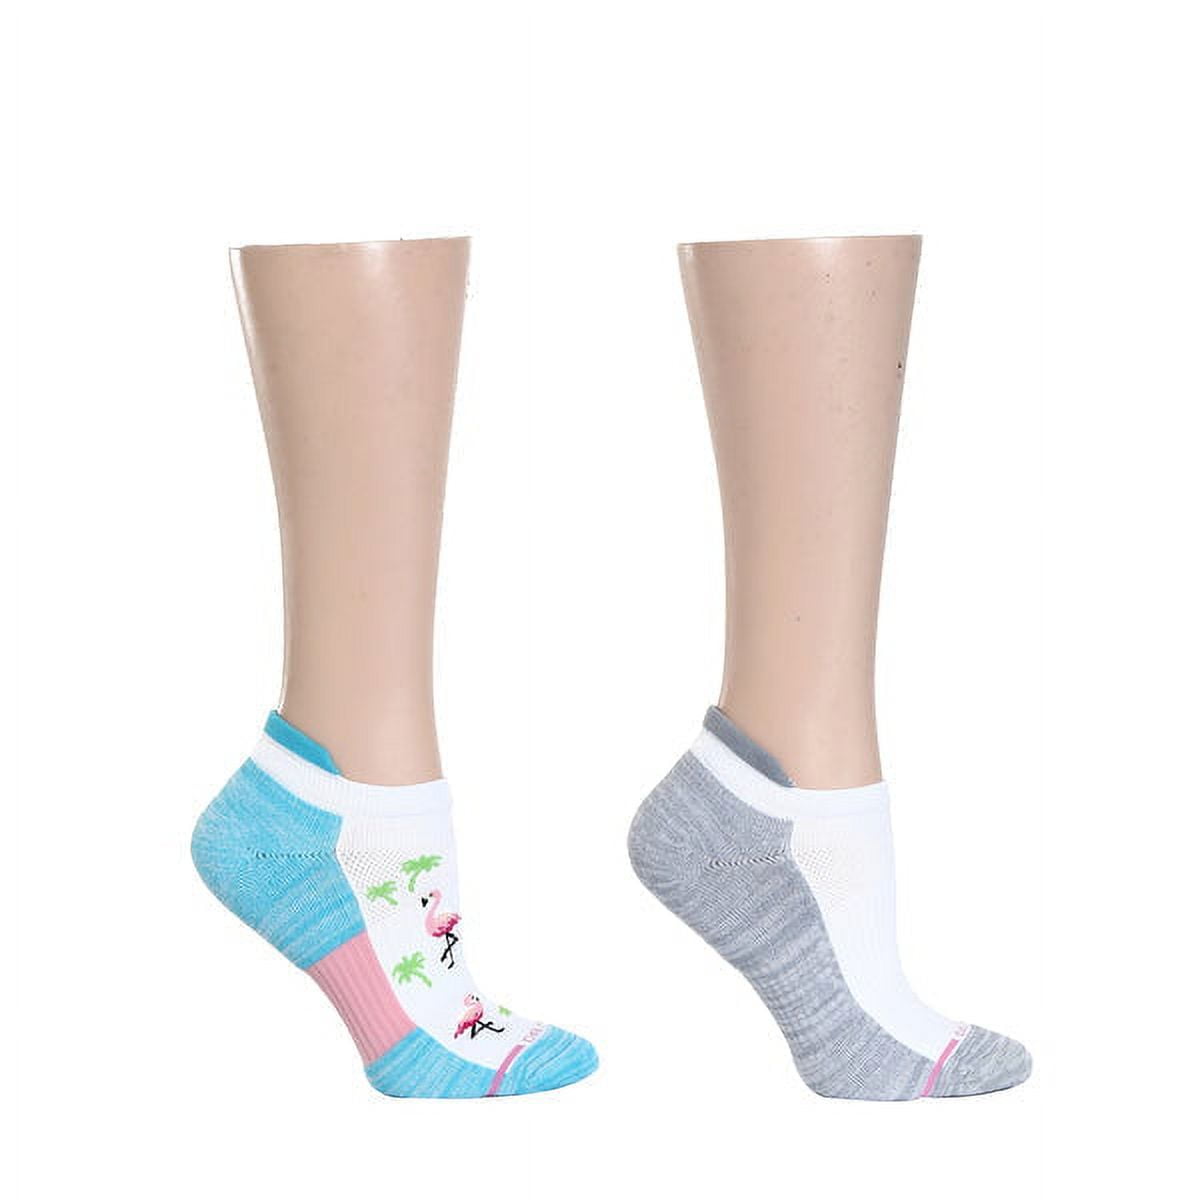 Dr. Motion Women's 2 Pack Animal Design and White Compression Ankle ...